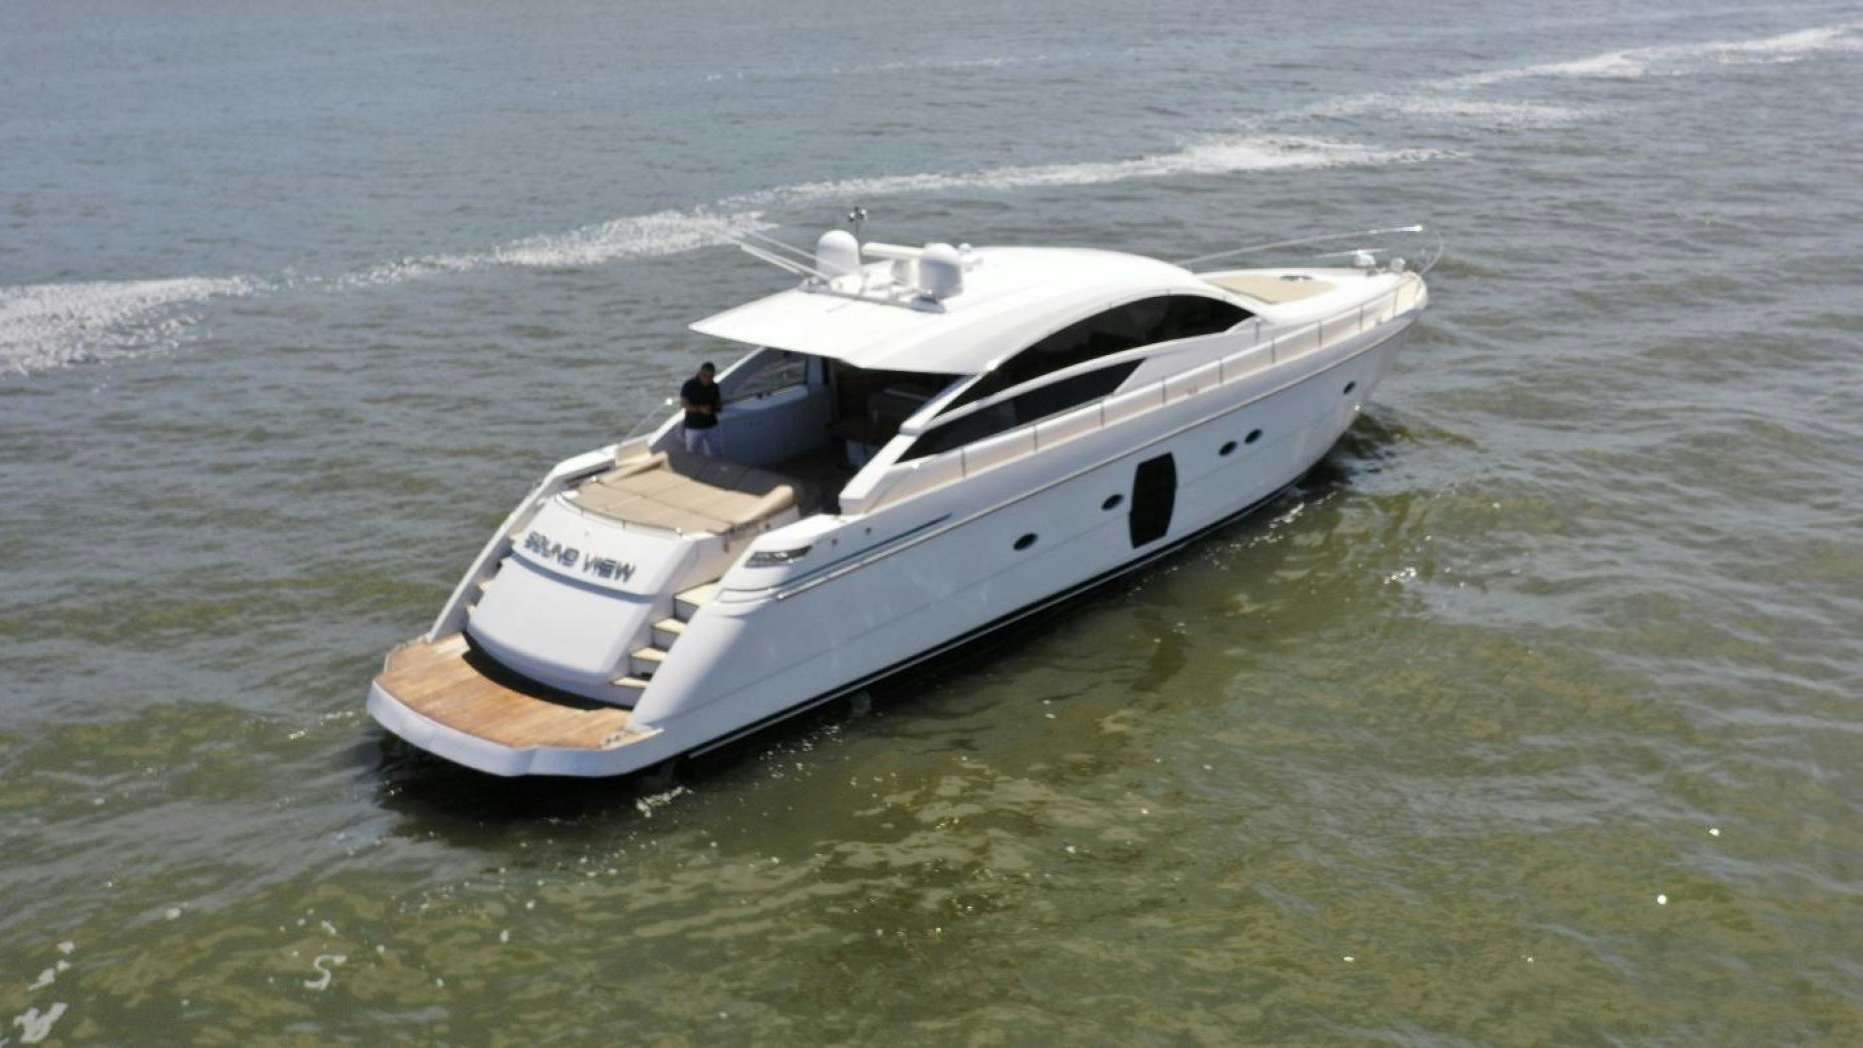 Soundview
Yacht for Sale